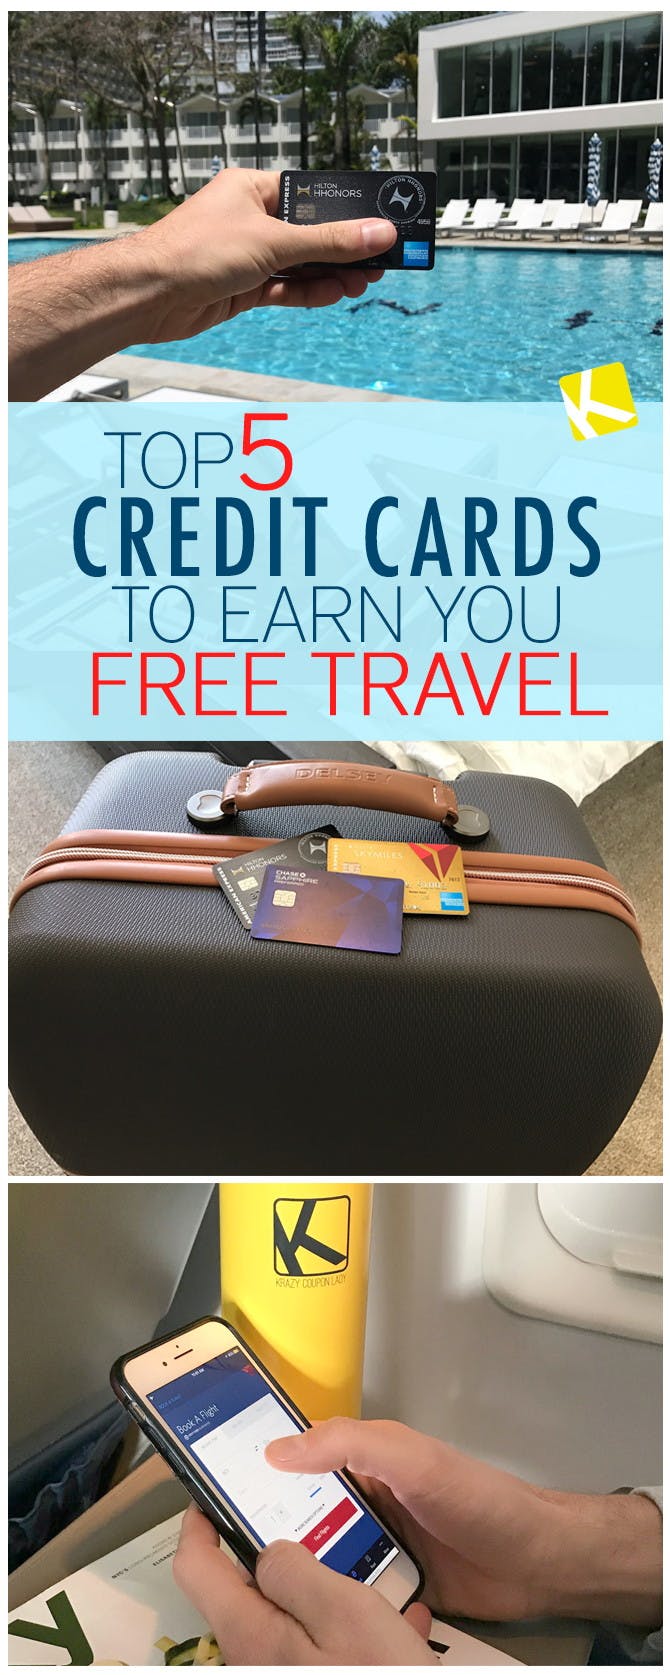 polica Dopisnik inercija  Top 5 Credit Cards to Earn You Free Travel - The Krazy Coupon Lady